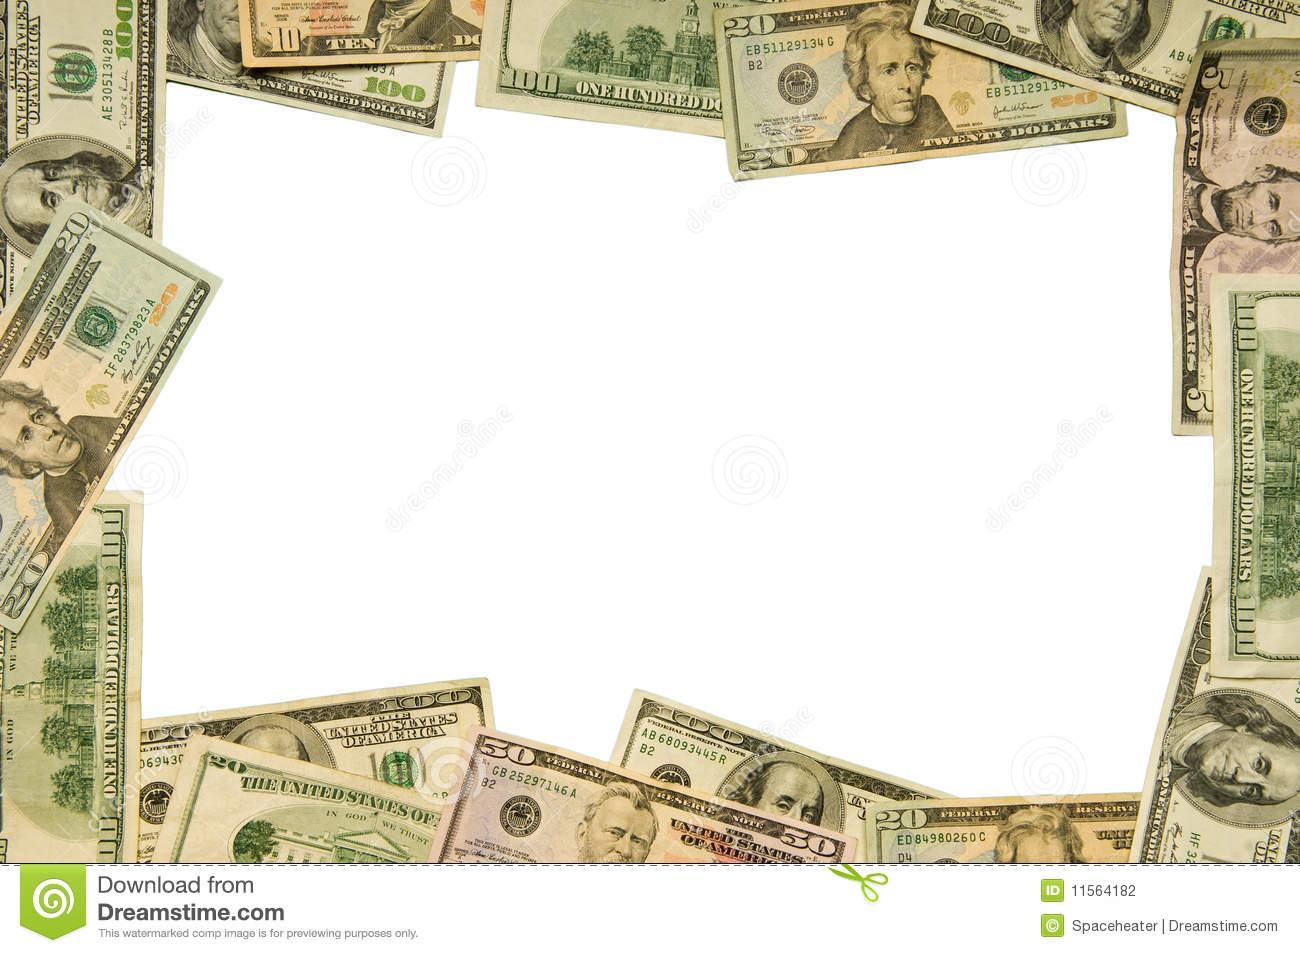 Large Denomination Currency Border Stock Photography   Image  11564182